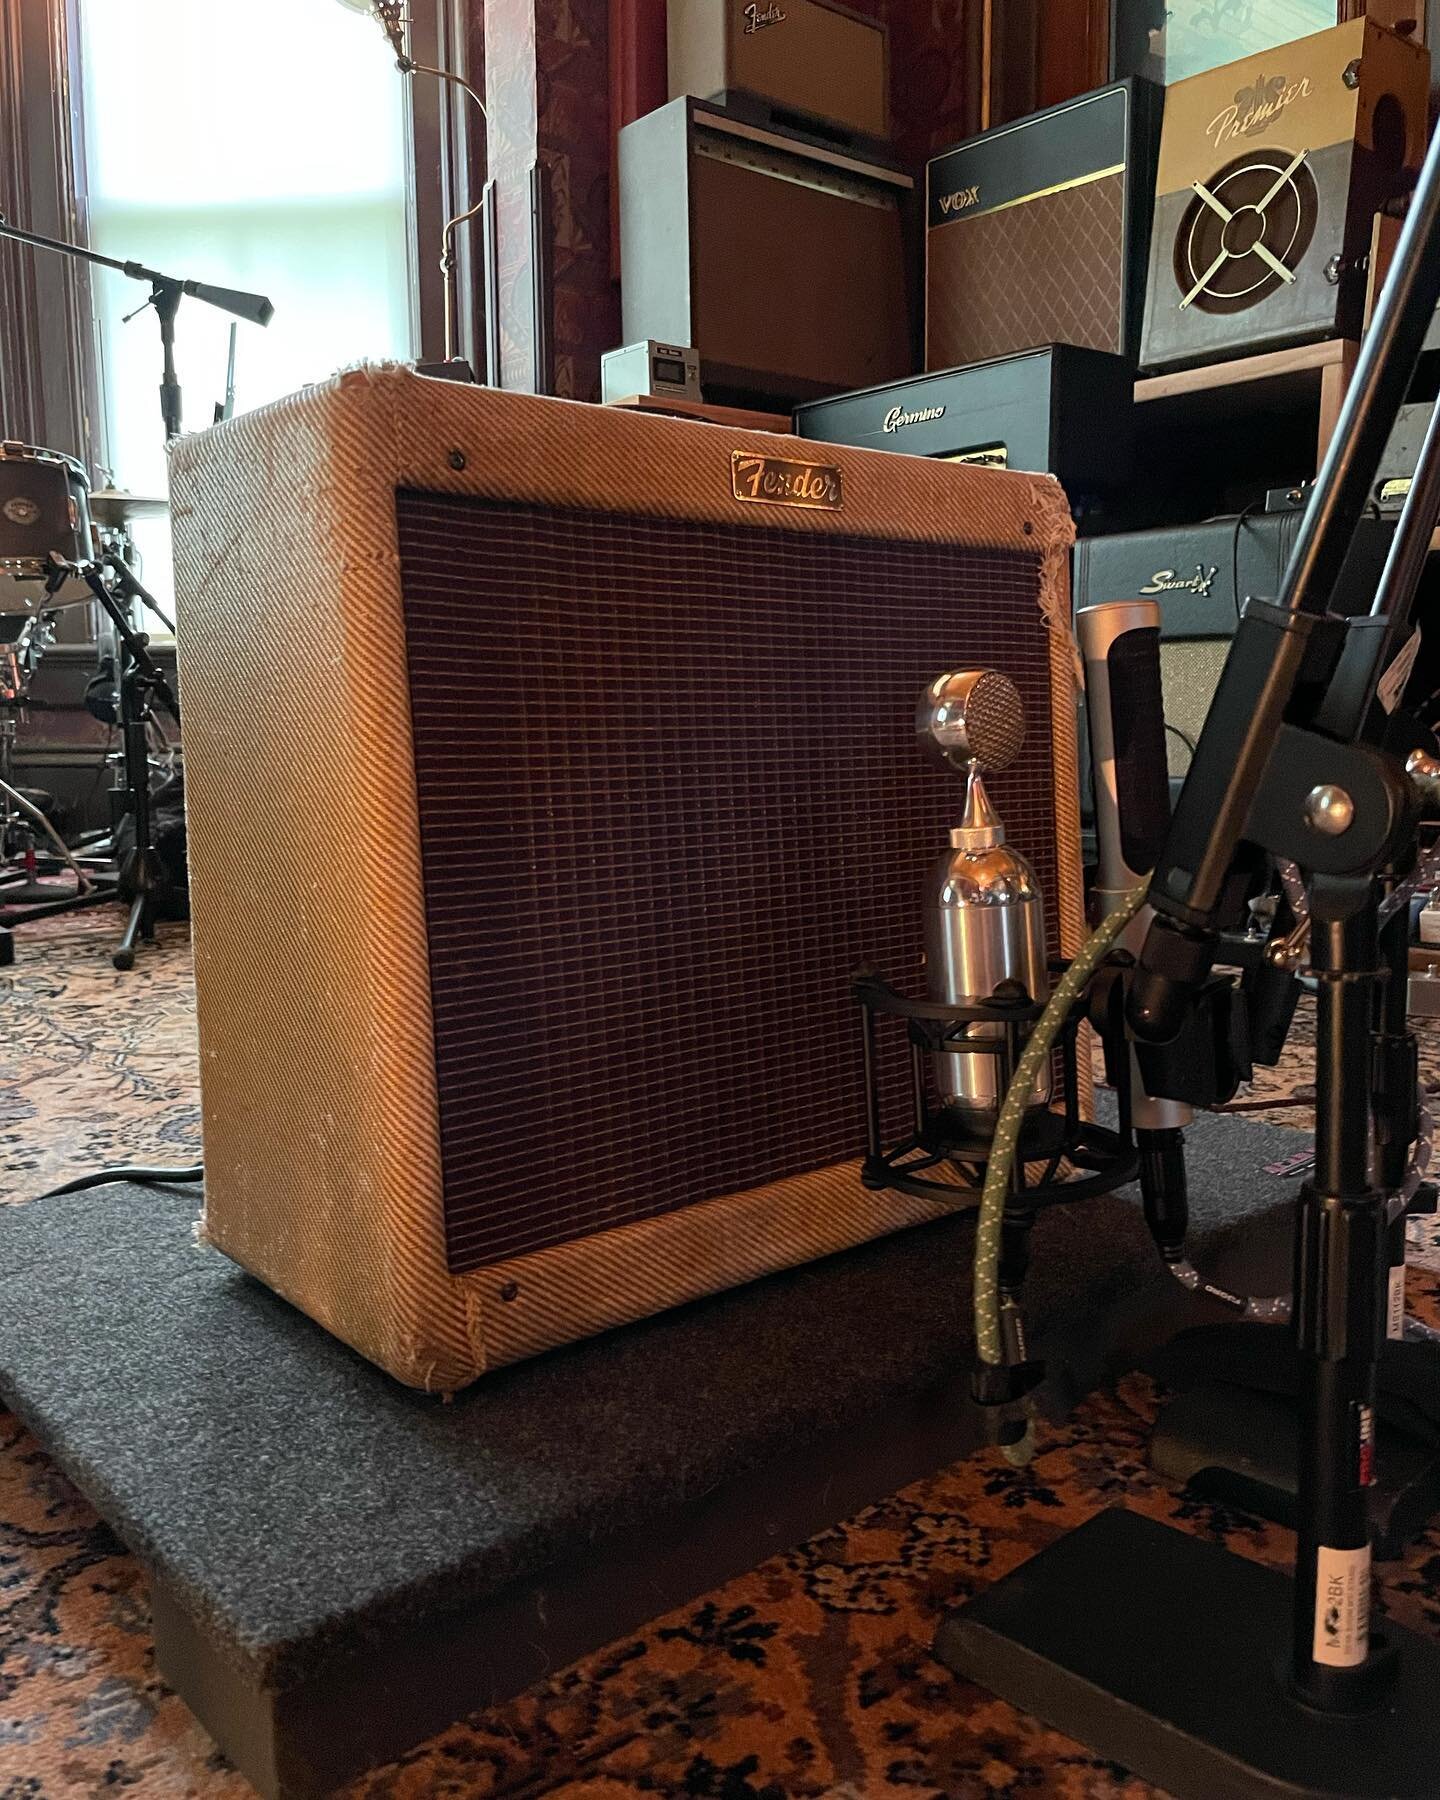 Our 1957 Fender Tweed Princeton provided a great option for an edge of breakup lead tone. This is such a sweet amp and always a joy to plug into. Thanks @cjk.bgm for trusting us to reamp your guitar!